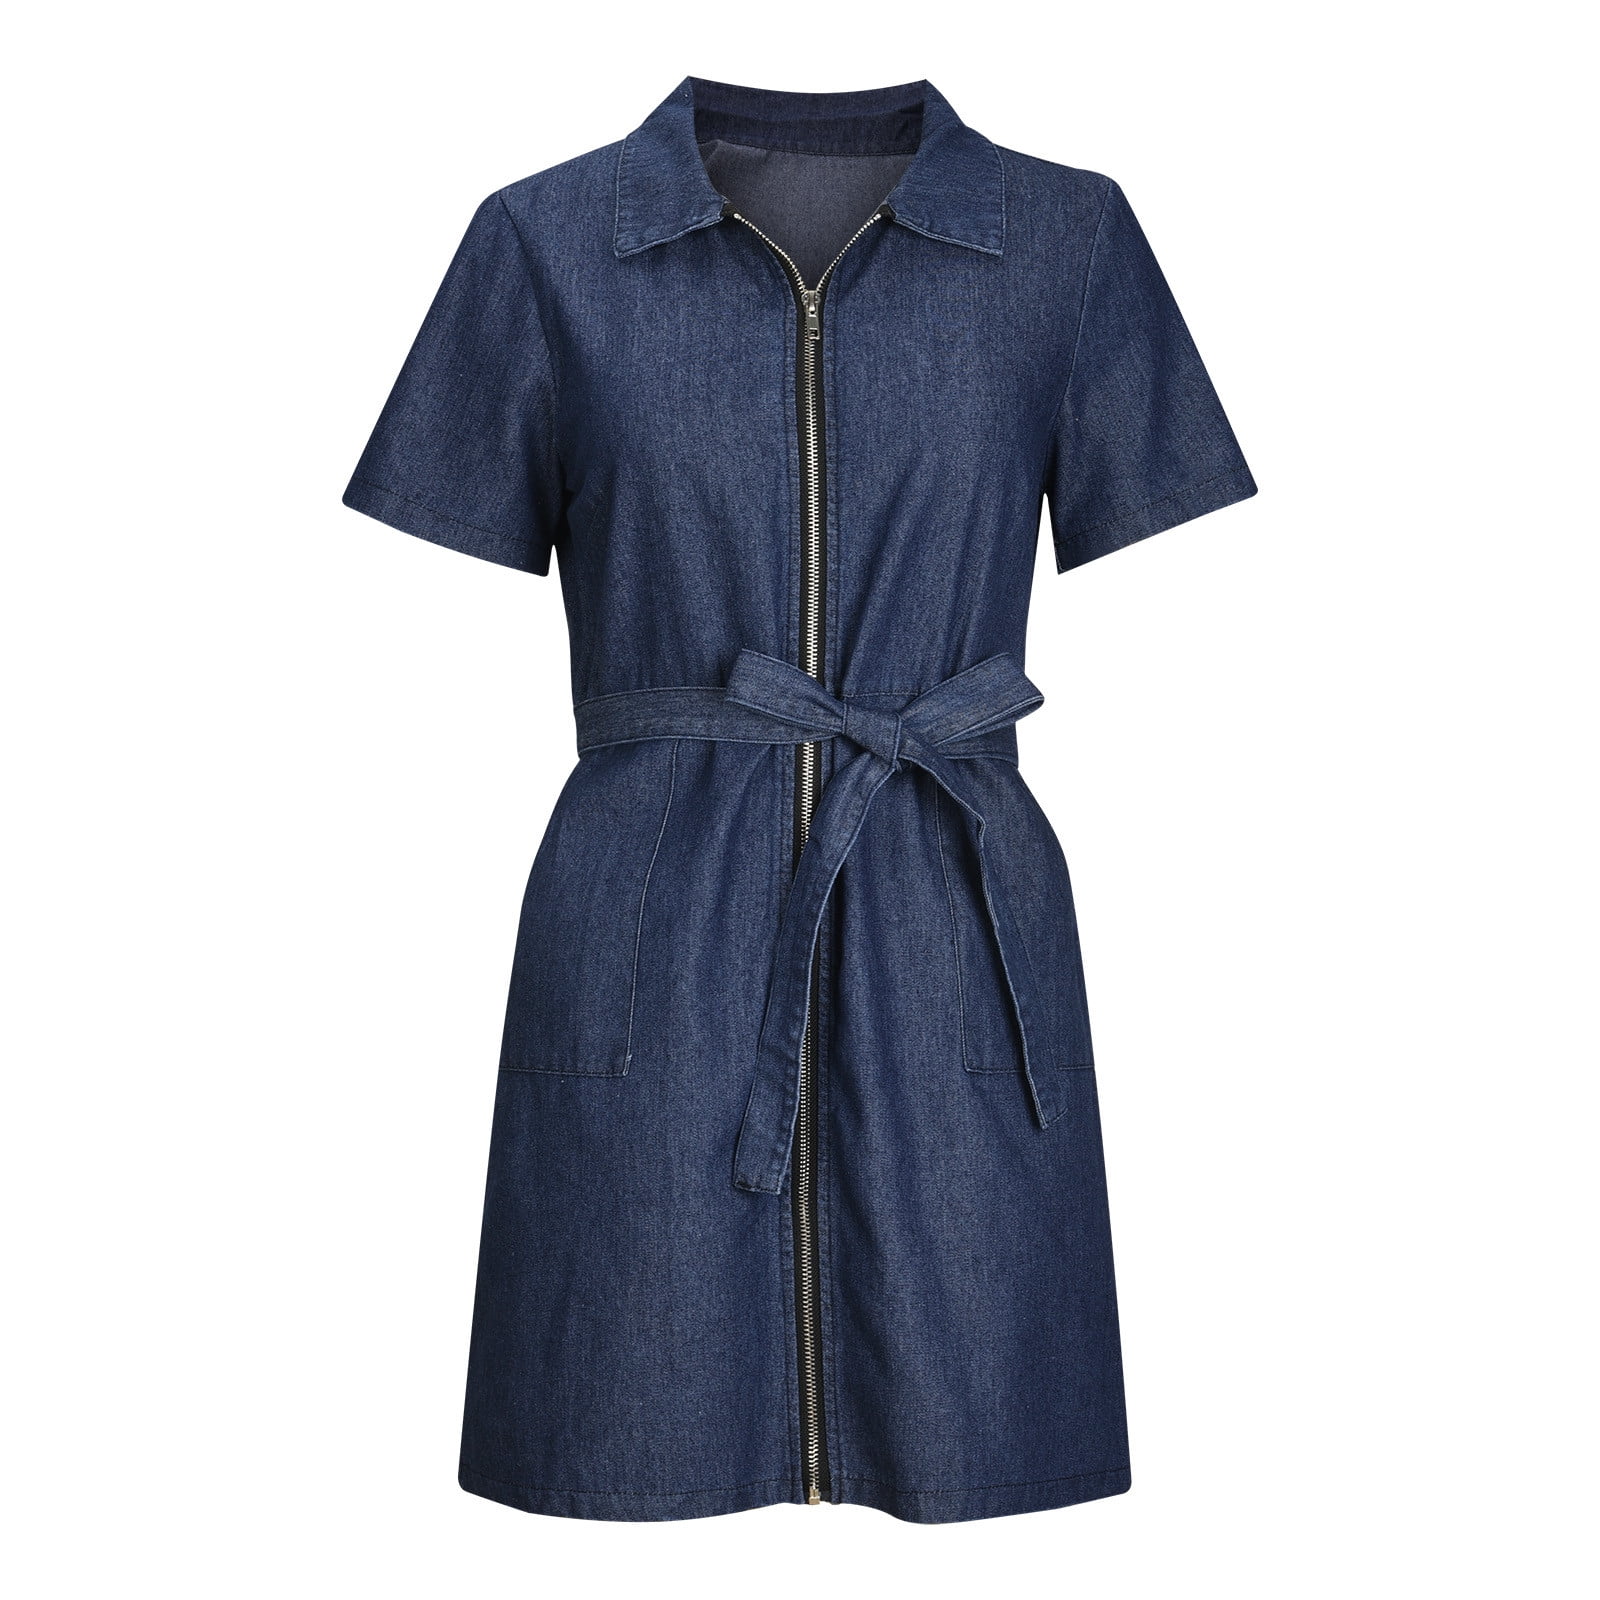 Blue Denim Slim Fit Jeans Denim Dress For Women For Women Sleeveless,  Split, Zipper Closure, Perfect For Summer Street Fashion, Clubbing, And  Casual Bodycon Style From Halibuta, $44.19